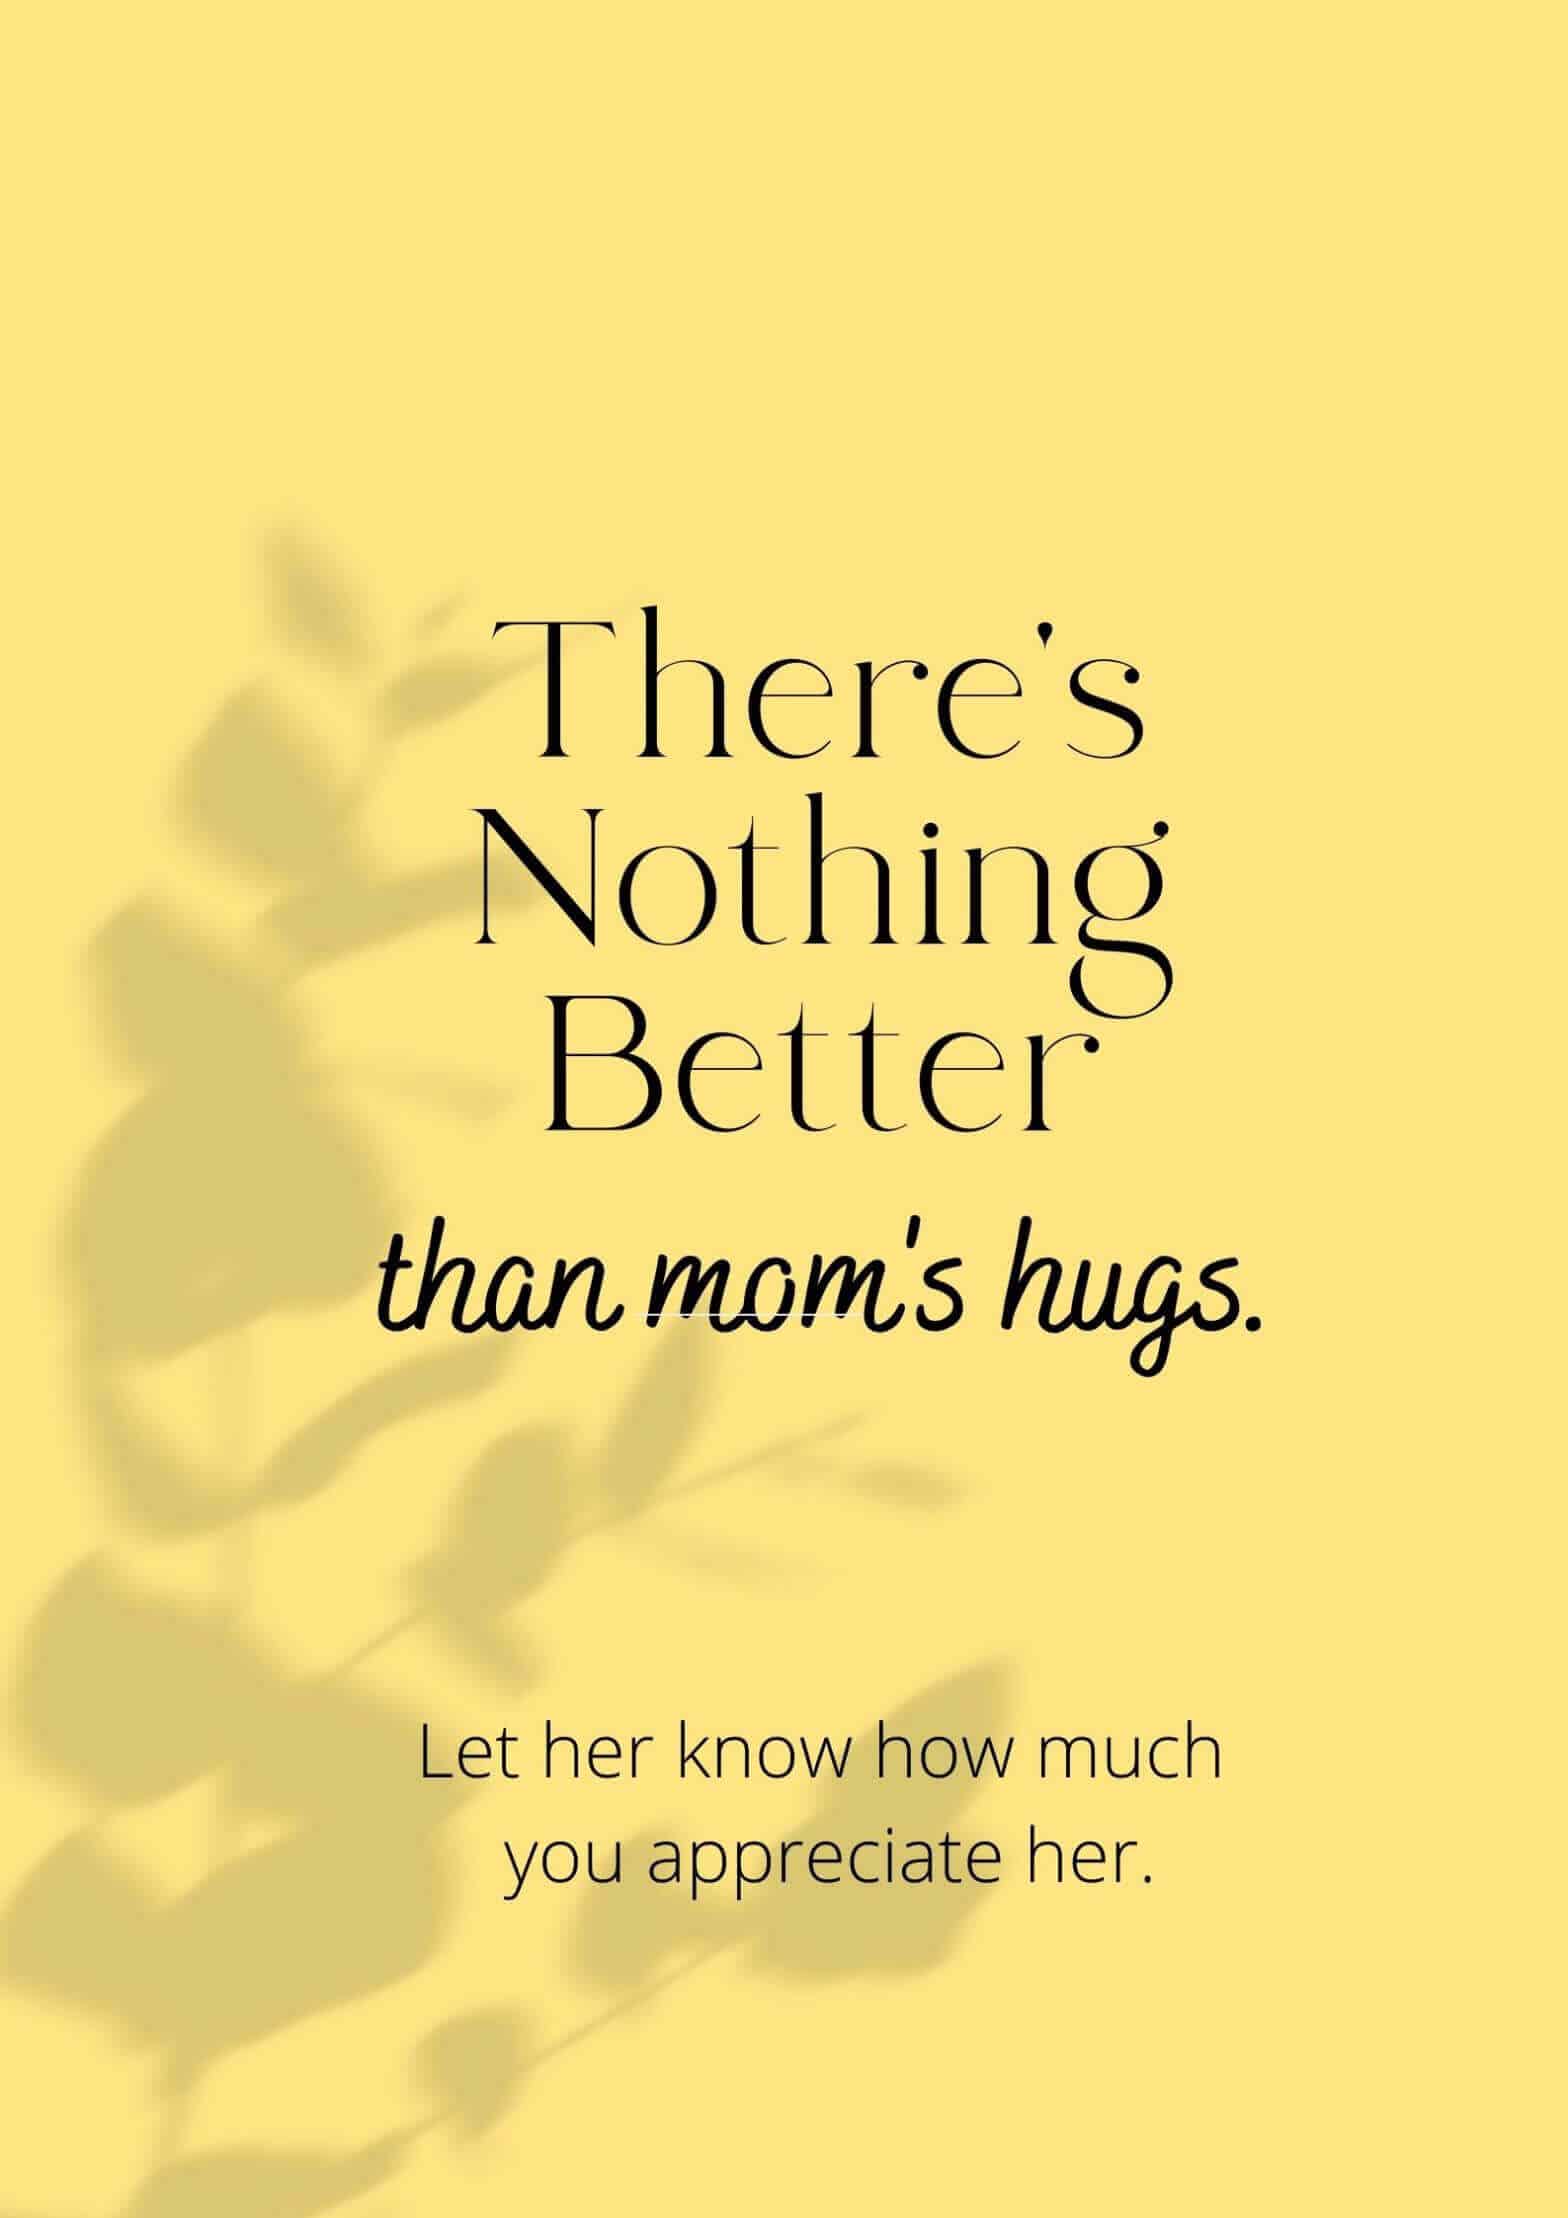 Inspiring Mother's Day quotes card to express your love and appreciation